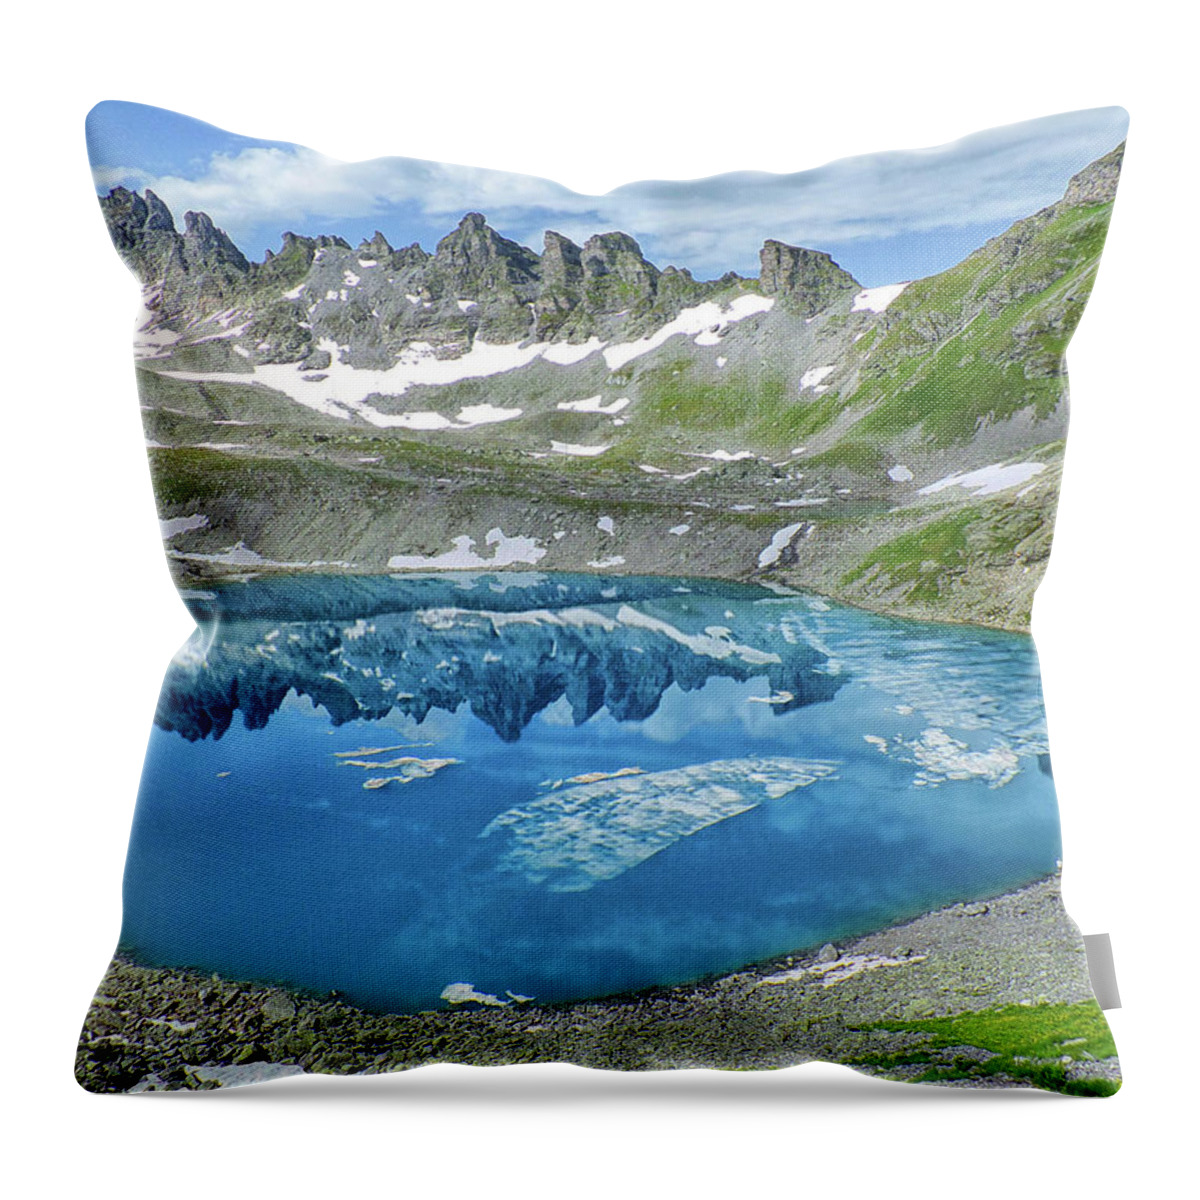 Tranquility Throw Pillow featuring the photograph Mountains Reflected In Lake by Werner Büchel